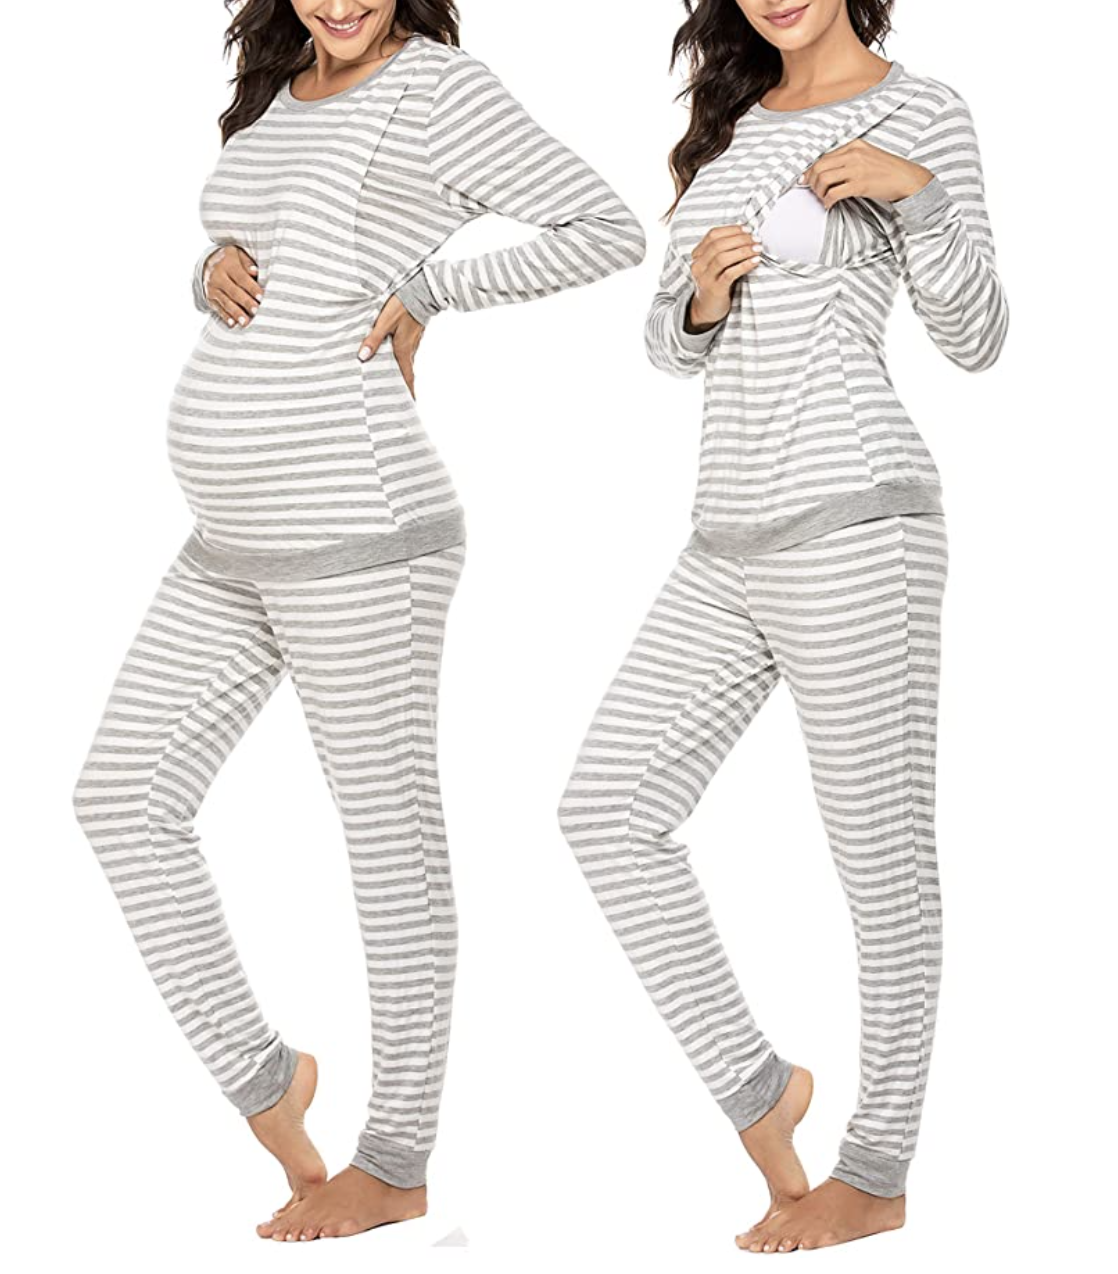 gifts-for-pregnant-women-pjs